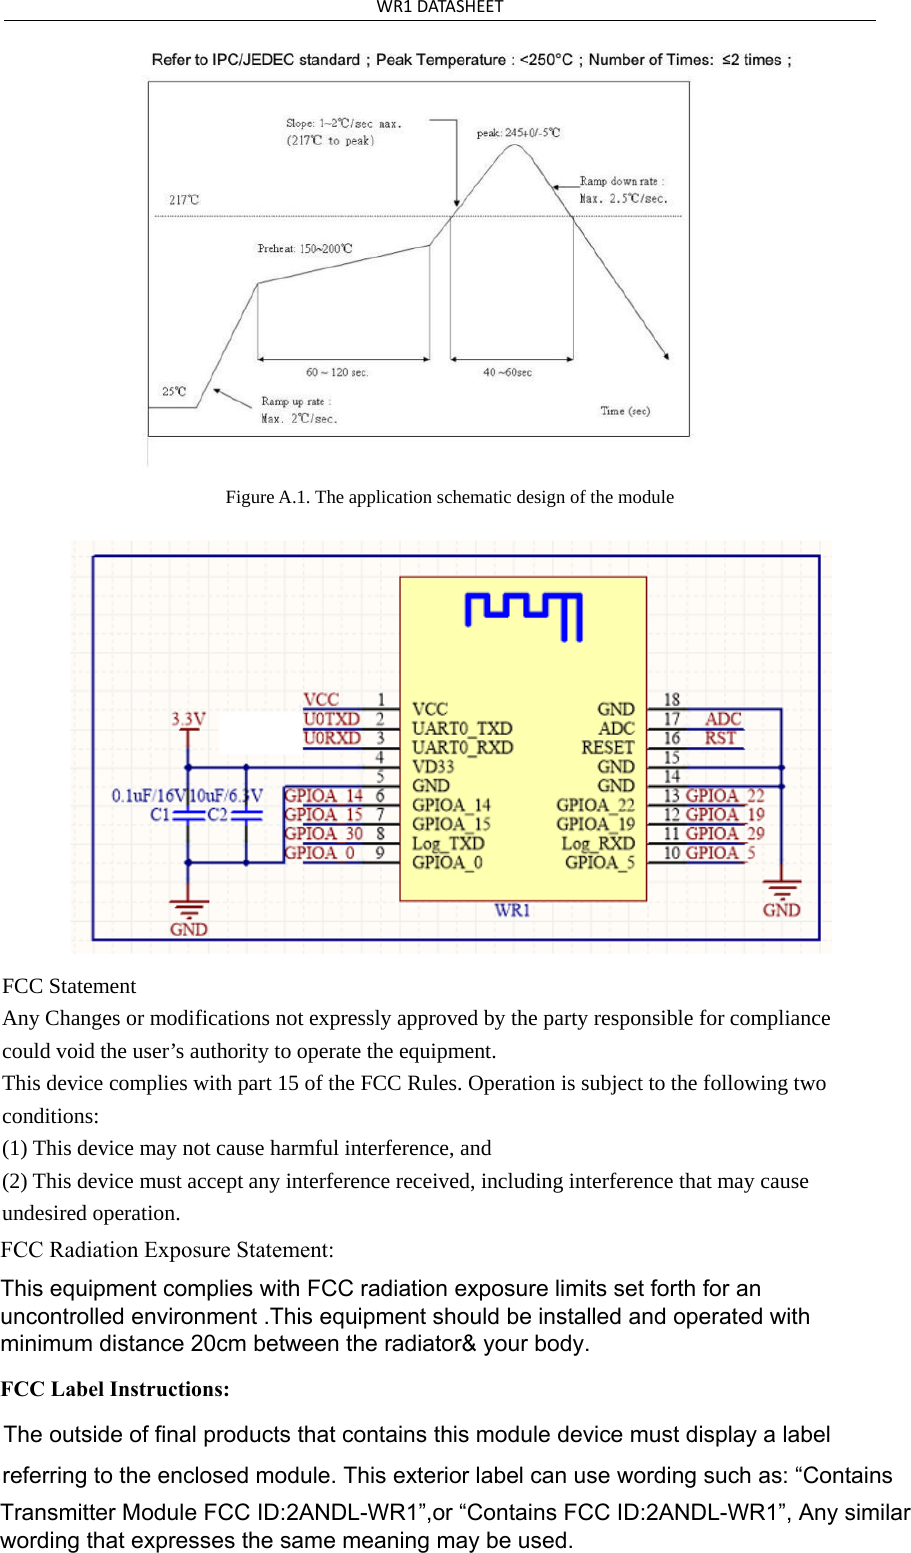 WR1DATASHEETFigure A.1. The application schematic design of the module FCC Statement   Any Changes or modifications not expressly approved by the party responsible for compliance could void the user’s authority to operate the equipment.     This device complies with part 15 of the FCC Rules. Operation is subject to the following two conditions:   (1) This device may not cause harmful interference, and     (2) This device must accept any interference received, including interference that may cause undesired operation.   FCC Radiation Exposure Statement: This equipment complies with FCC radiation exposure limits set forth for an uncontrolled environment .This equipment should be installed and operated with minimum distance 20cm between the radiator&amp; your body.    FCC Label Instructions:The outside of final products that contains this module device must display a label referring to the enclosed module. This exterior label can use wording such as: “Contains Transmitter Module FCC ID:2ANDL-WR1”,or “Contains FCC ID:2ANDL-WR1”, Any similar wording that expresses the same meaning may be used. 